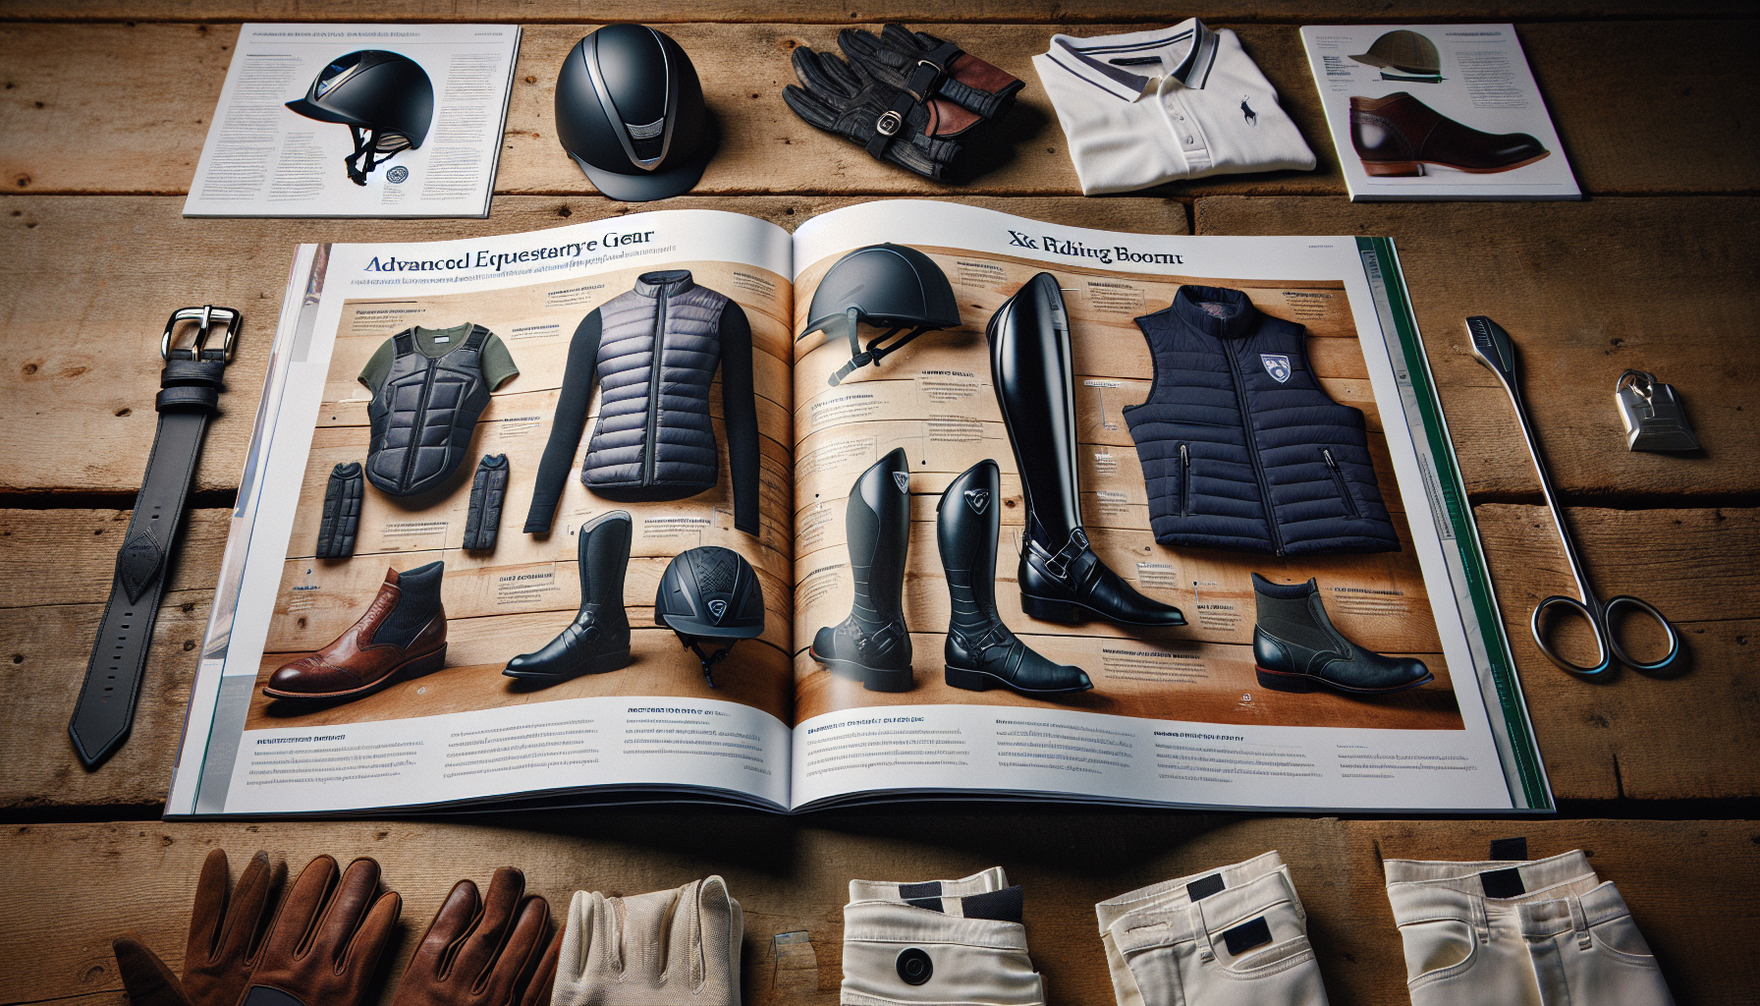 An in-depth guide on advanced equestrian safety gear displayed open on a wooden table: helmets, boots, vests, gloves, and breeches. The left page details the importance of an approved, fitting, and co